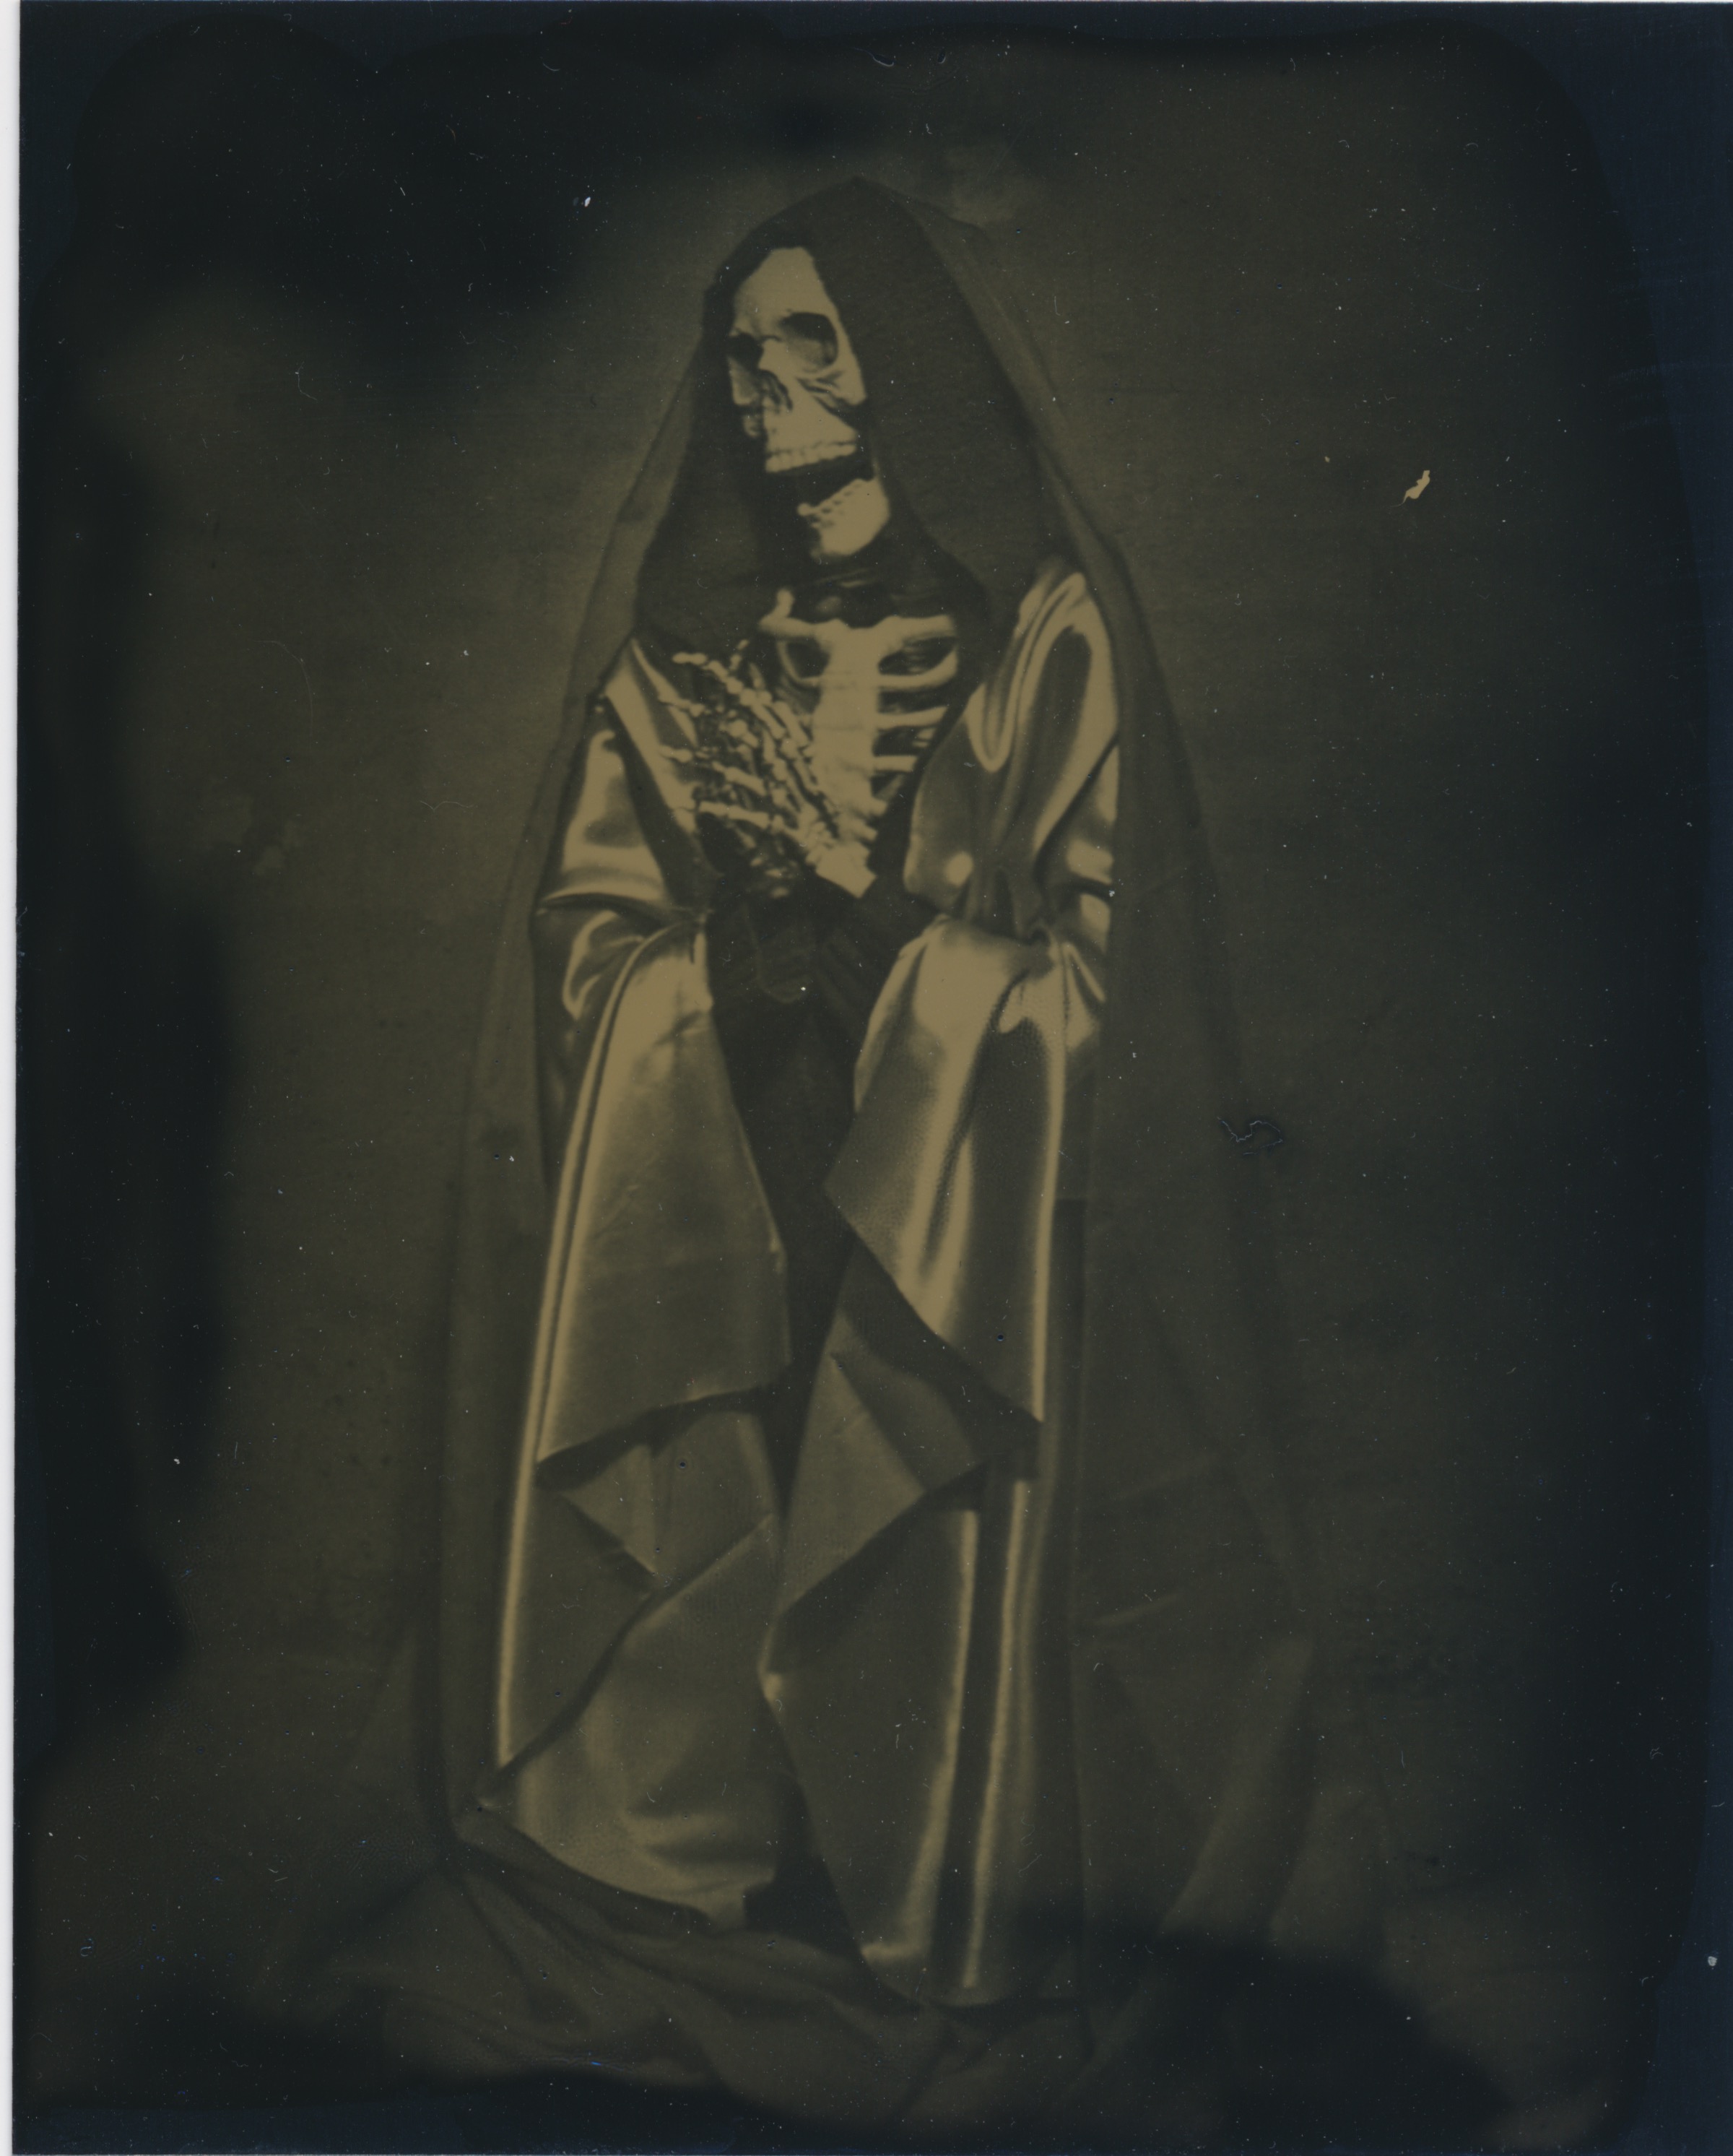   After The Virgin Mary    2015  Tintype  4x5 